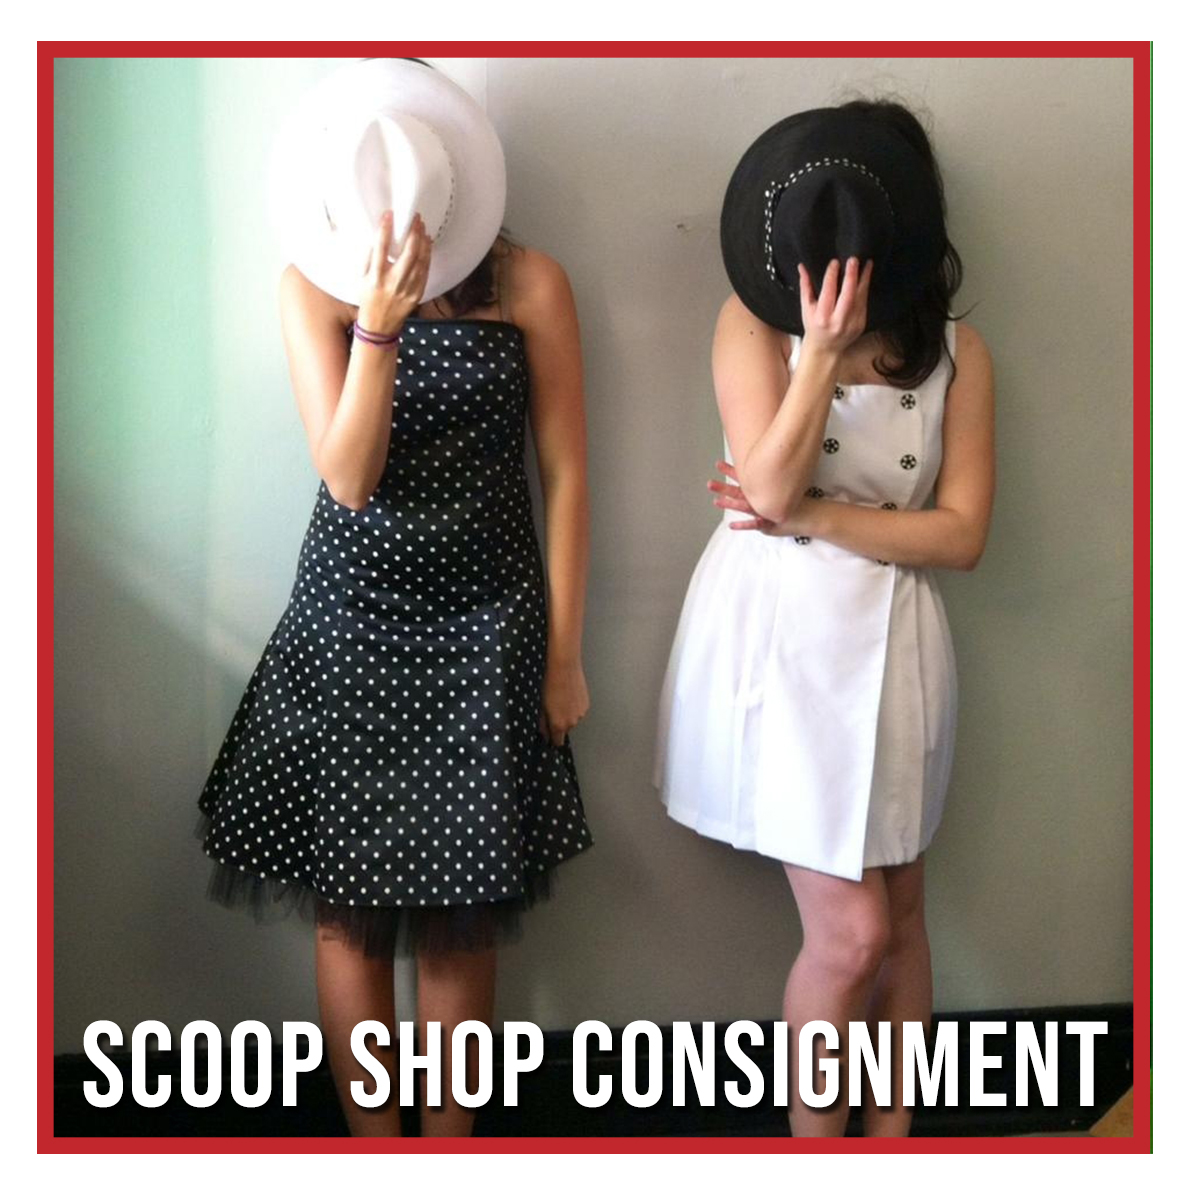 You are currently viewing Scoop Shop Consignment